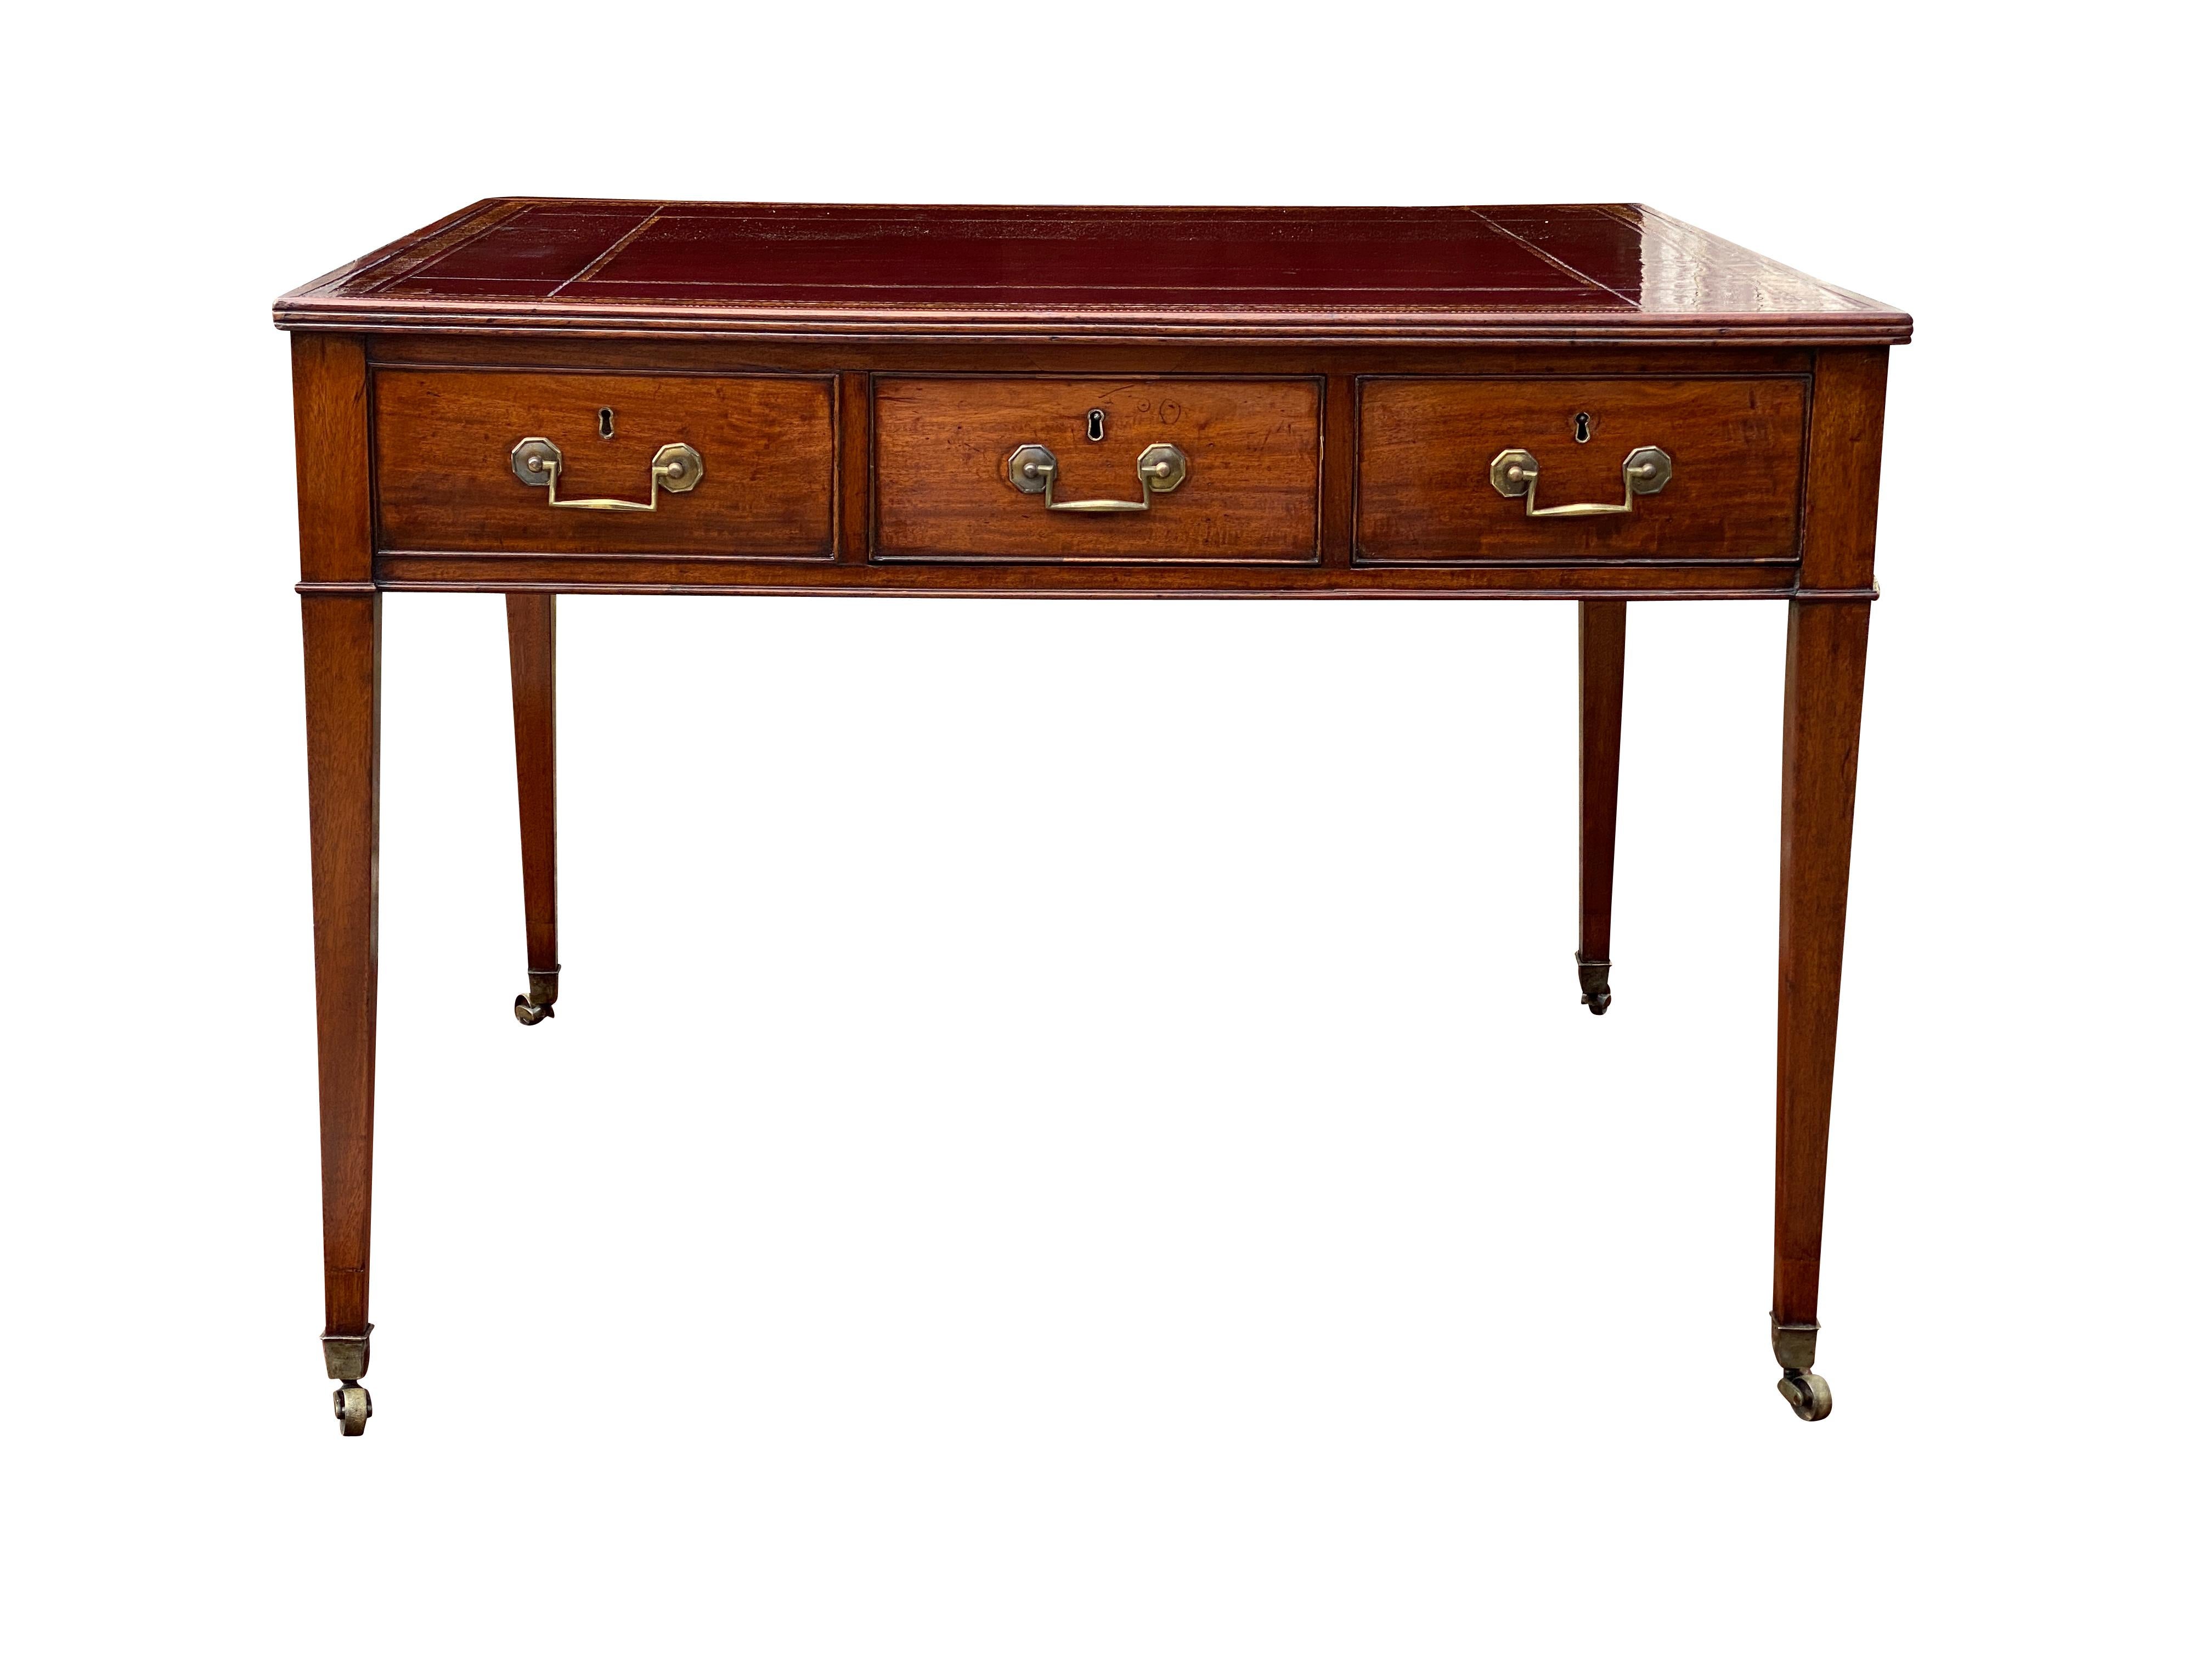 Rectangular top with inset deep burgundy leather with some flaws over three drawers with one central drawer on the reverse flanked by two false drawers, raised on square tapered legs and casters. Square brass bail handles.